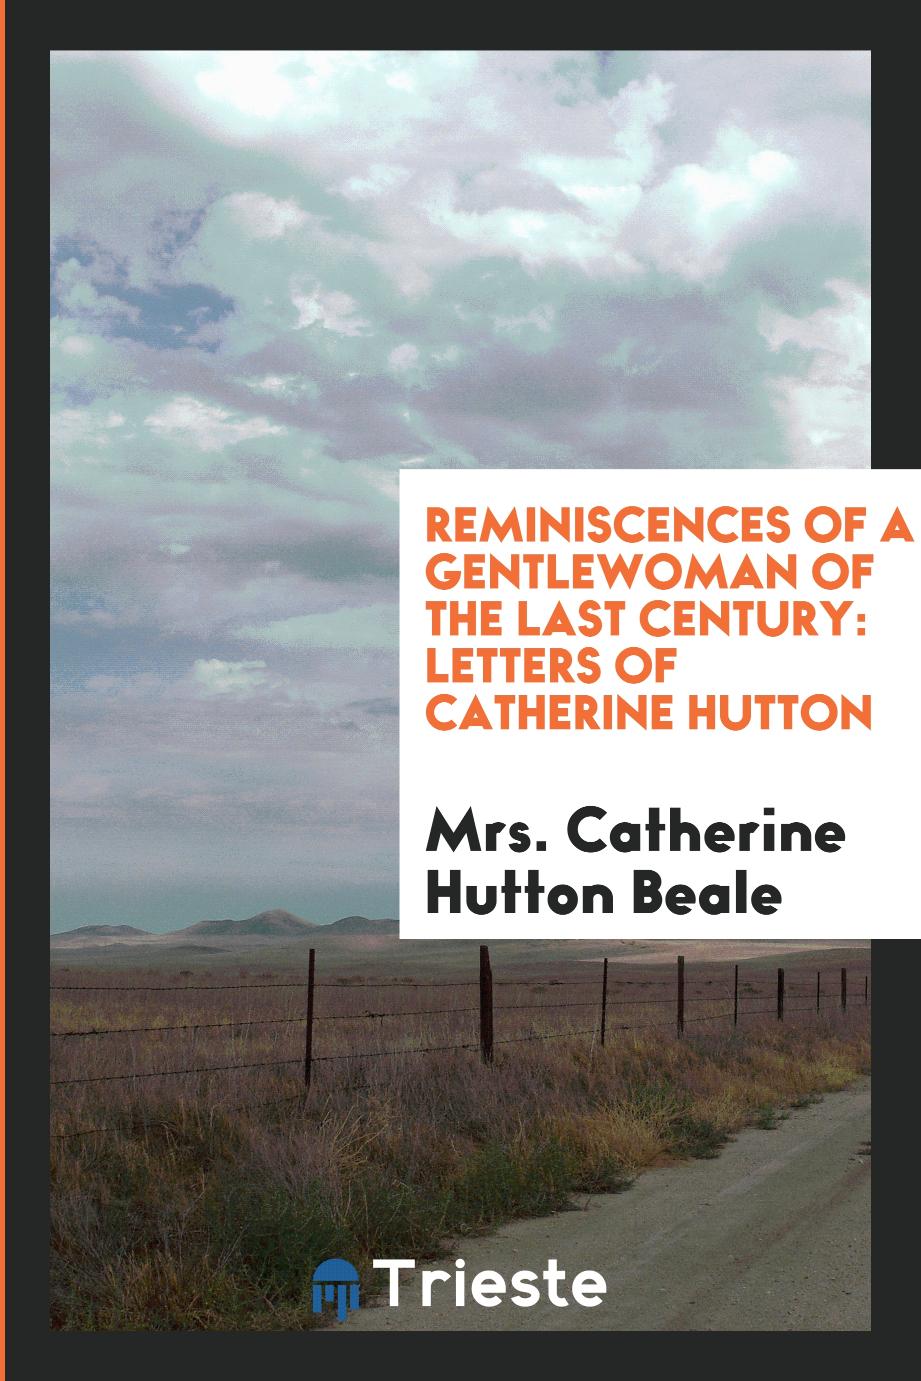 Reminiscences of a gentlewoman of the last century: letters of Catherine Hutton